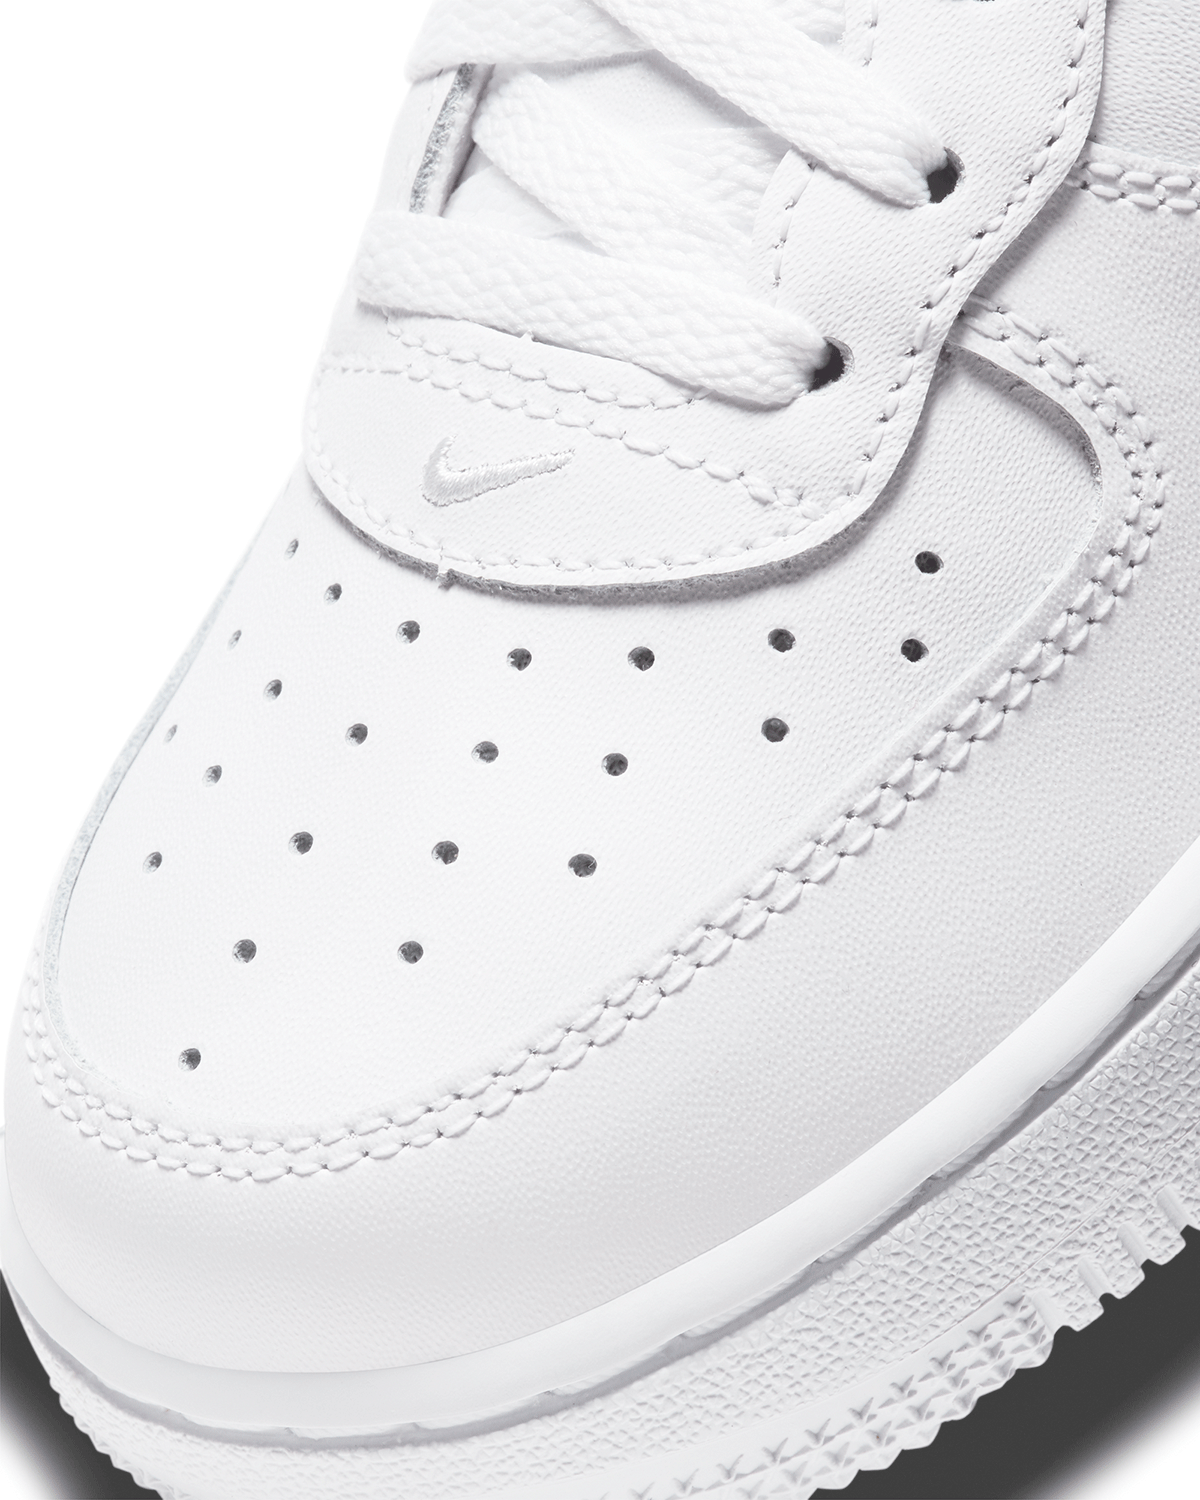 Force 1 LE (PS) White/White